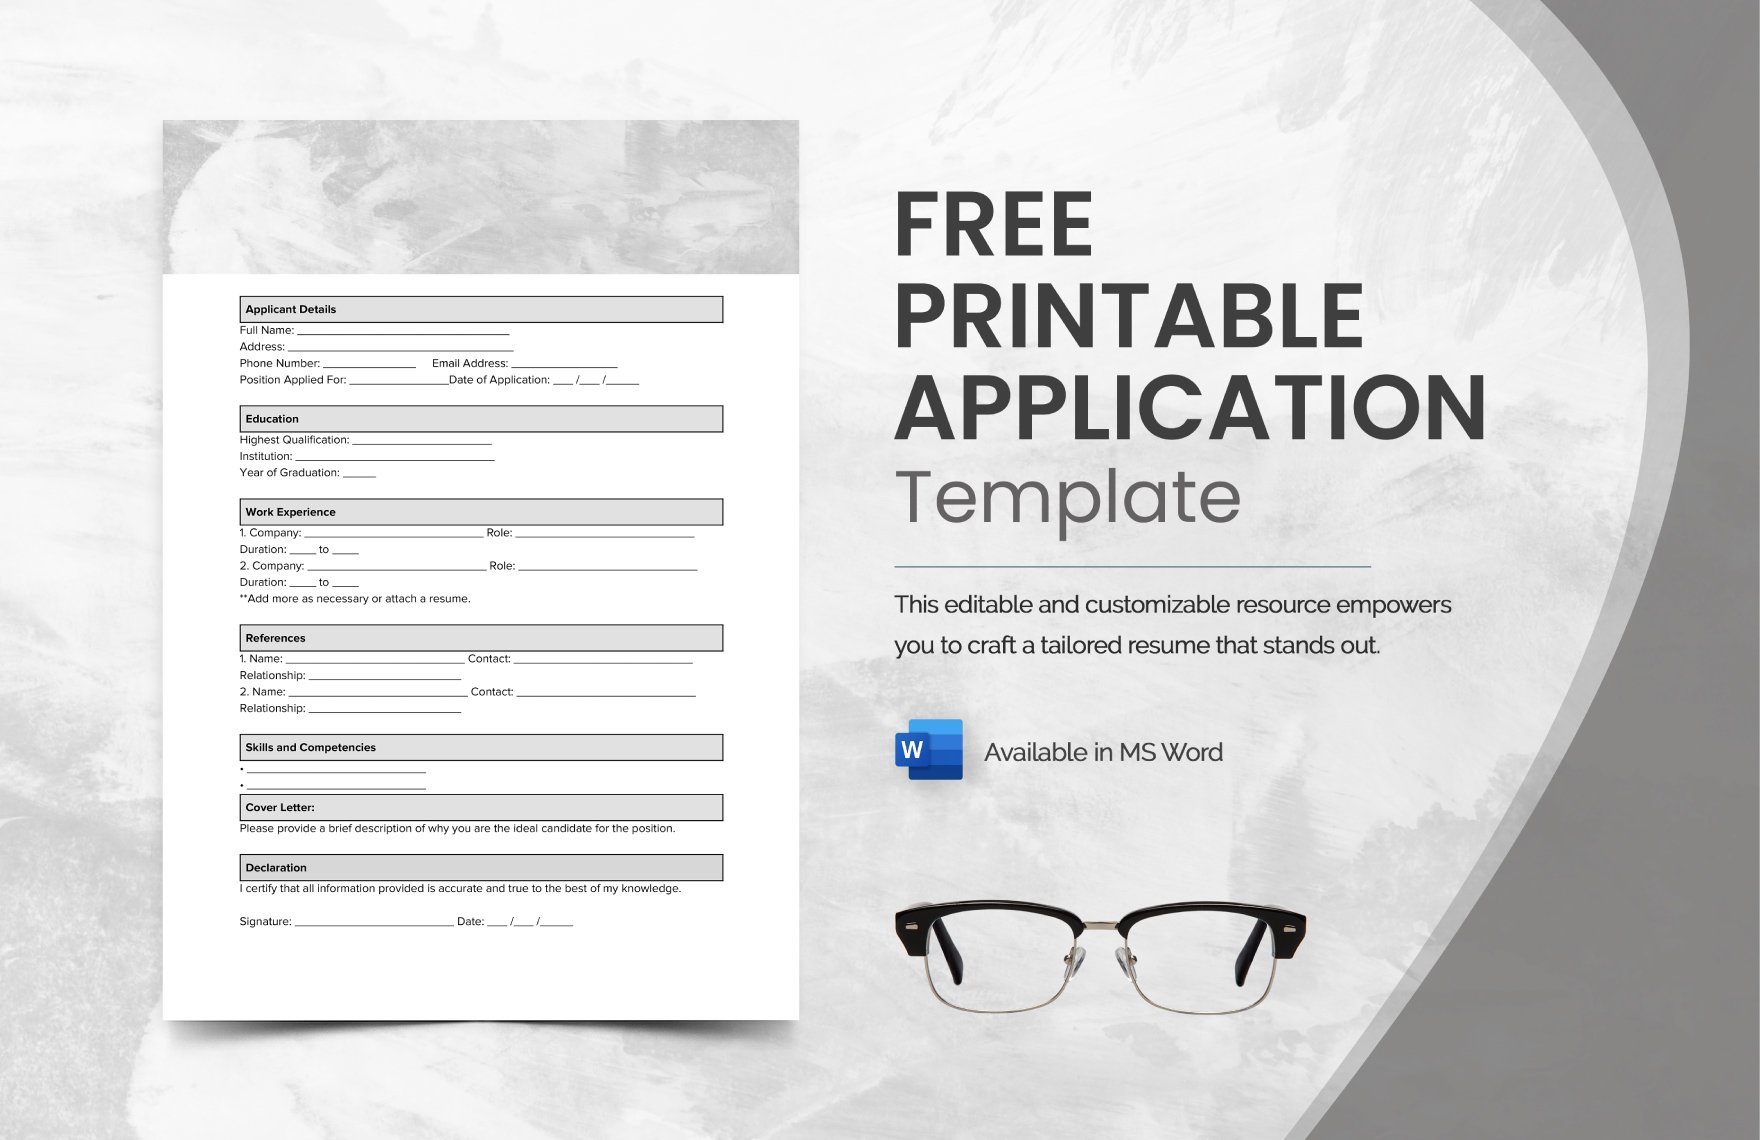 Free Printable Application Template in Word